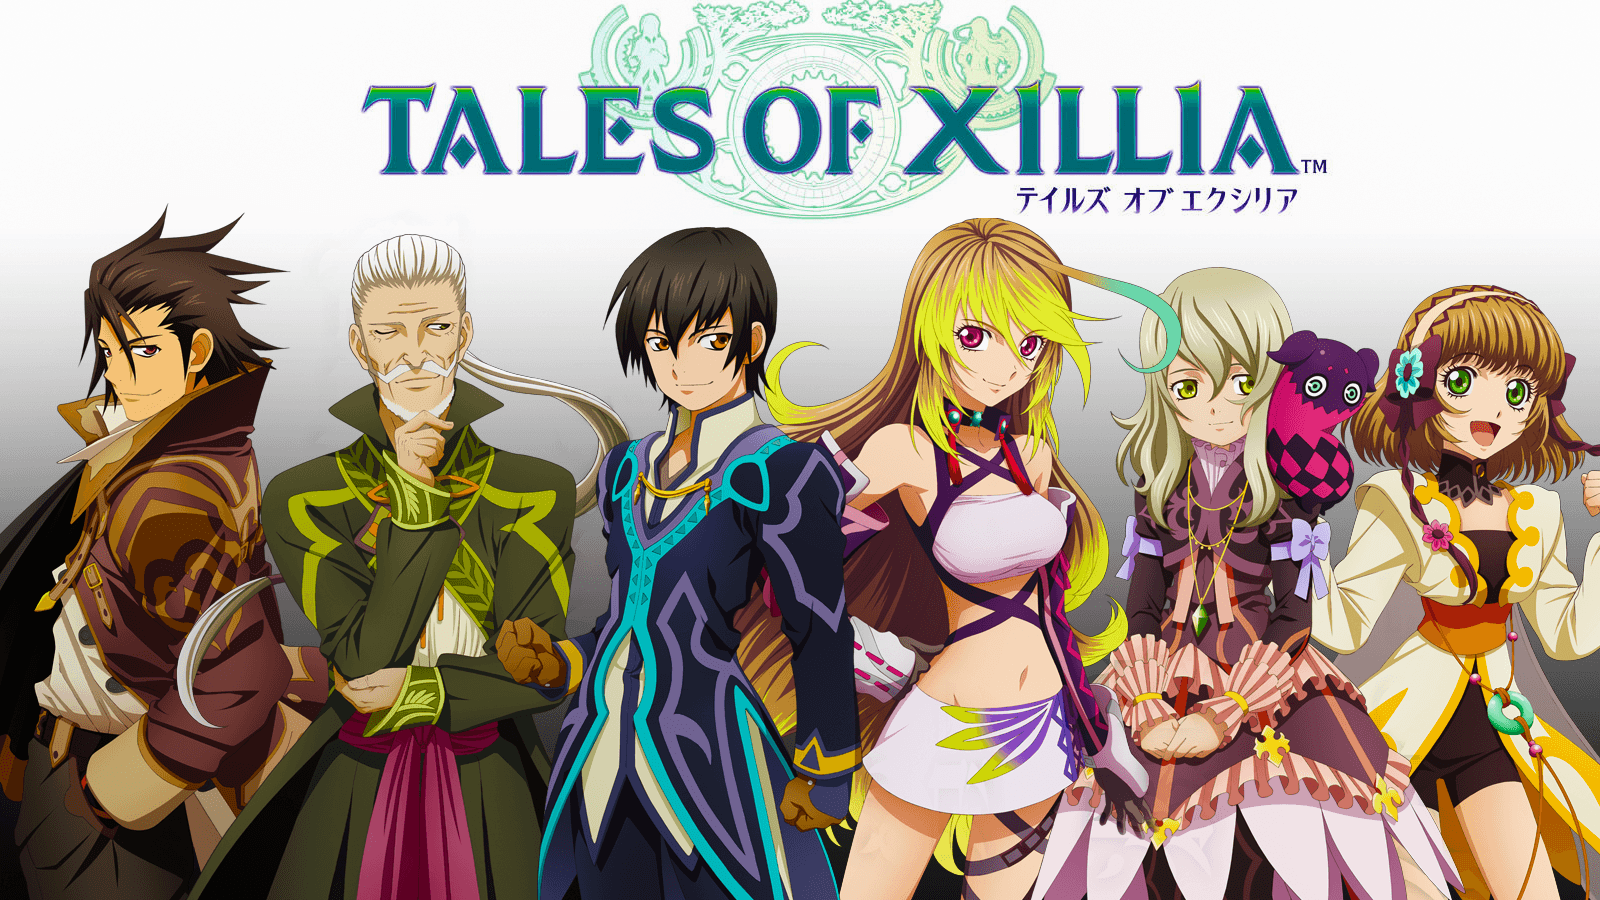 PS3 Review: Tales of Xillia. I Am Your Target Demographic